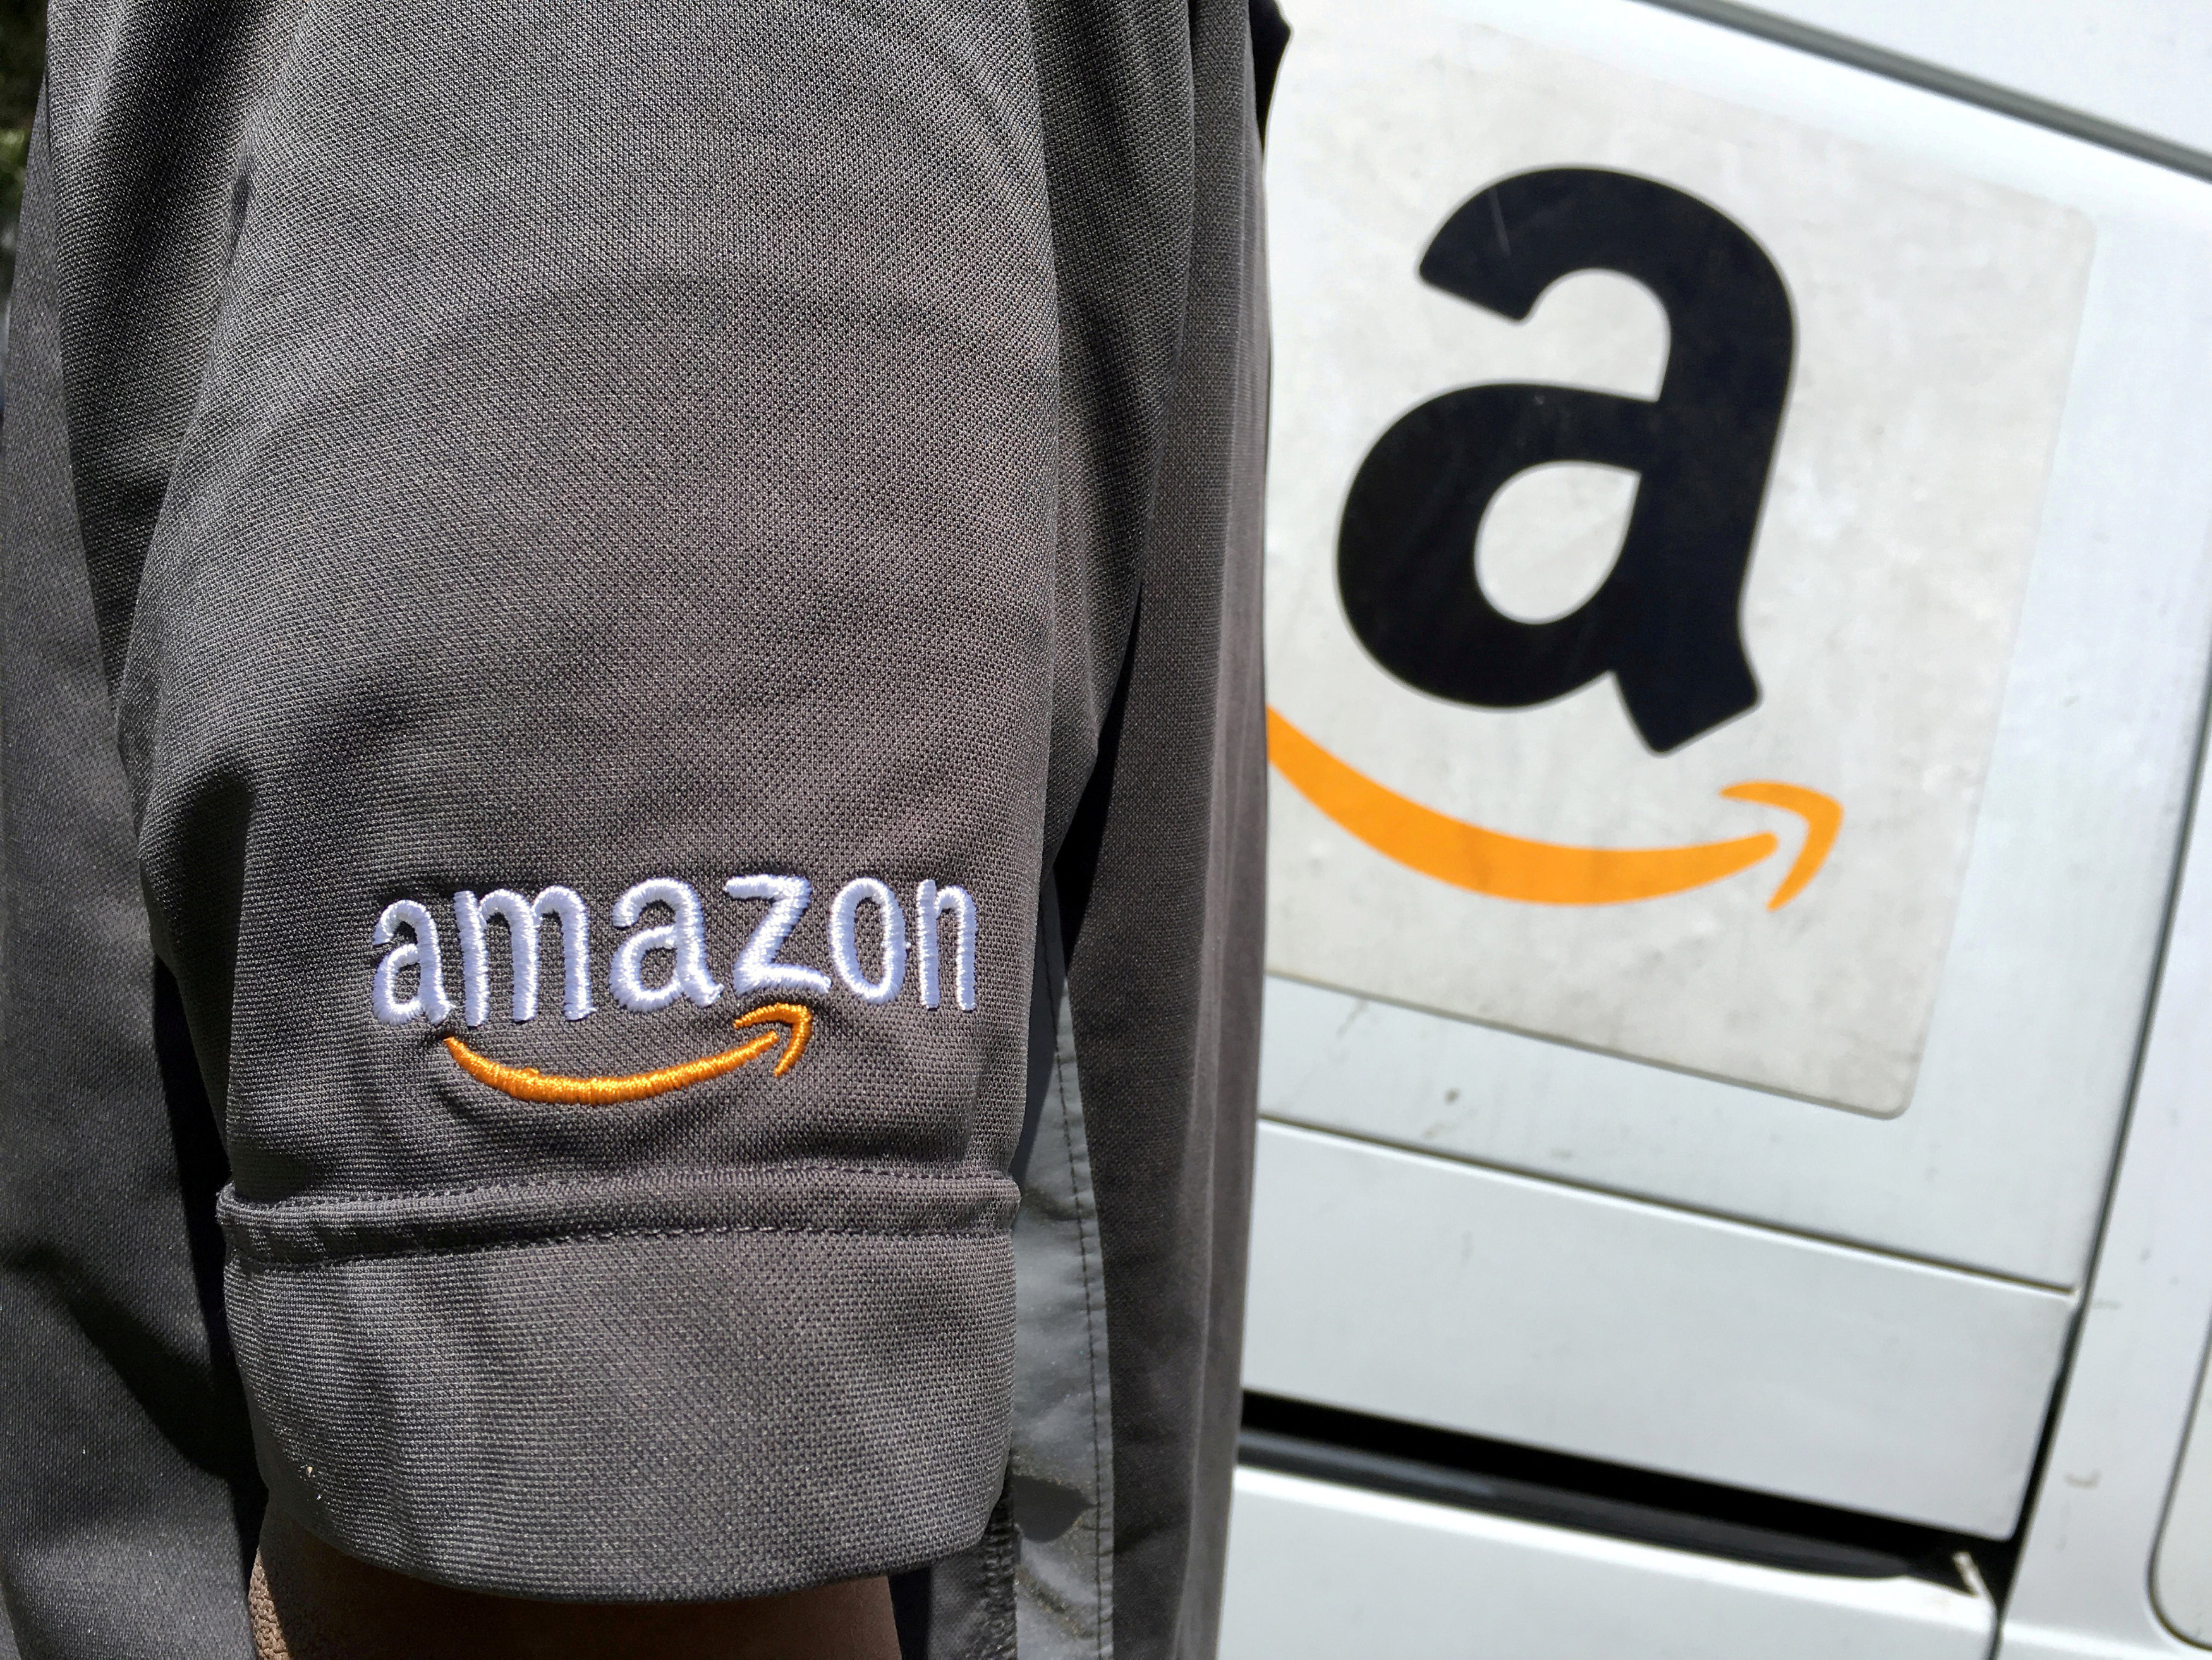 FTC probing allegations of Amazon's deceptive discounting